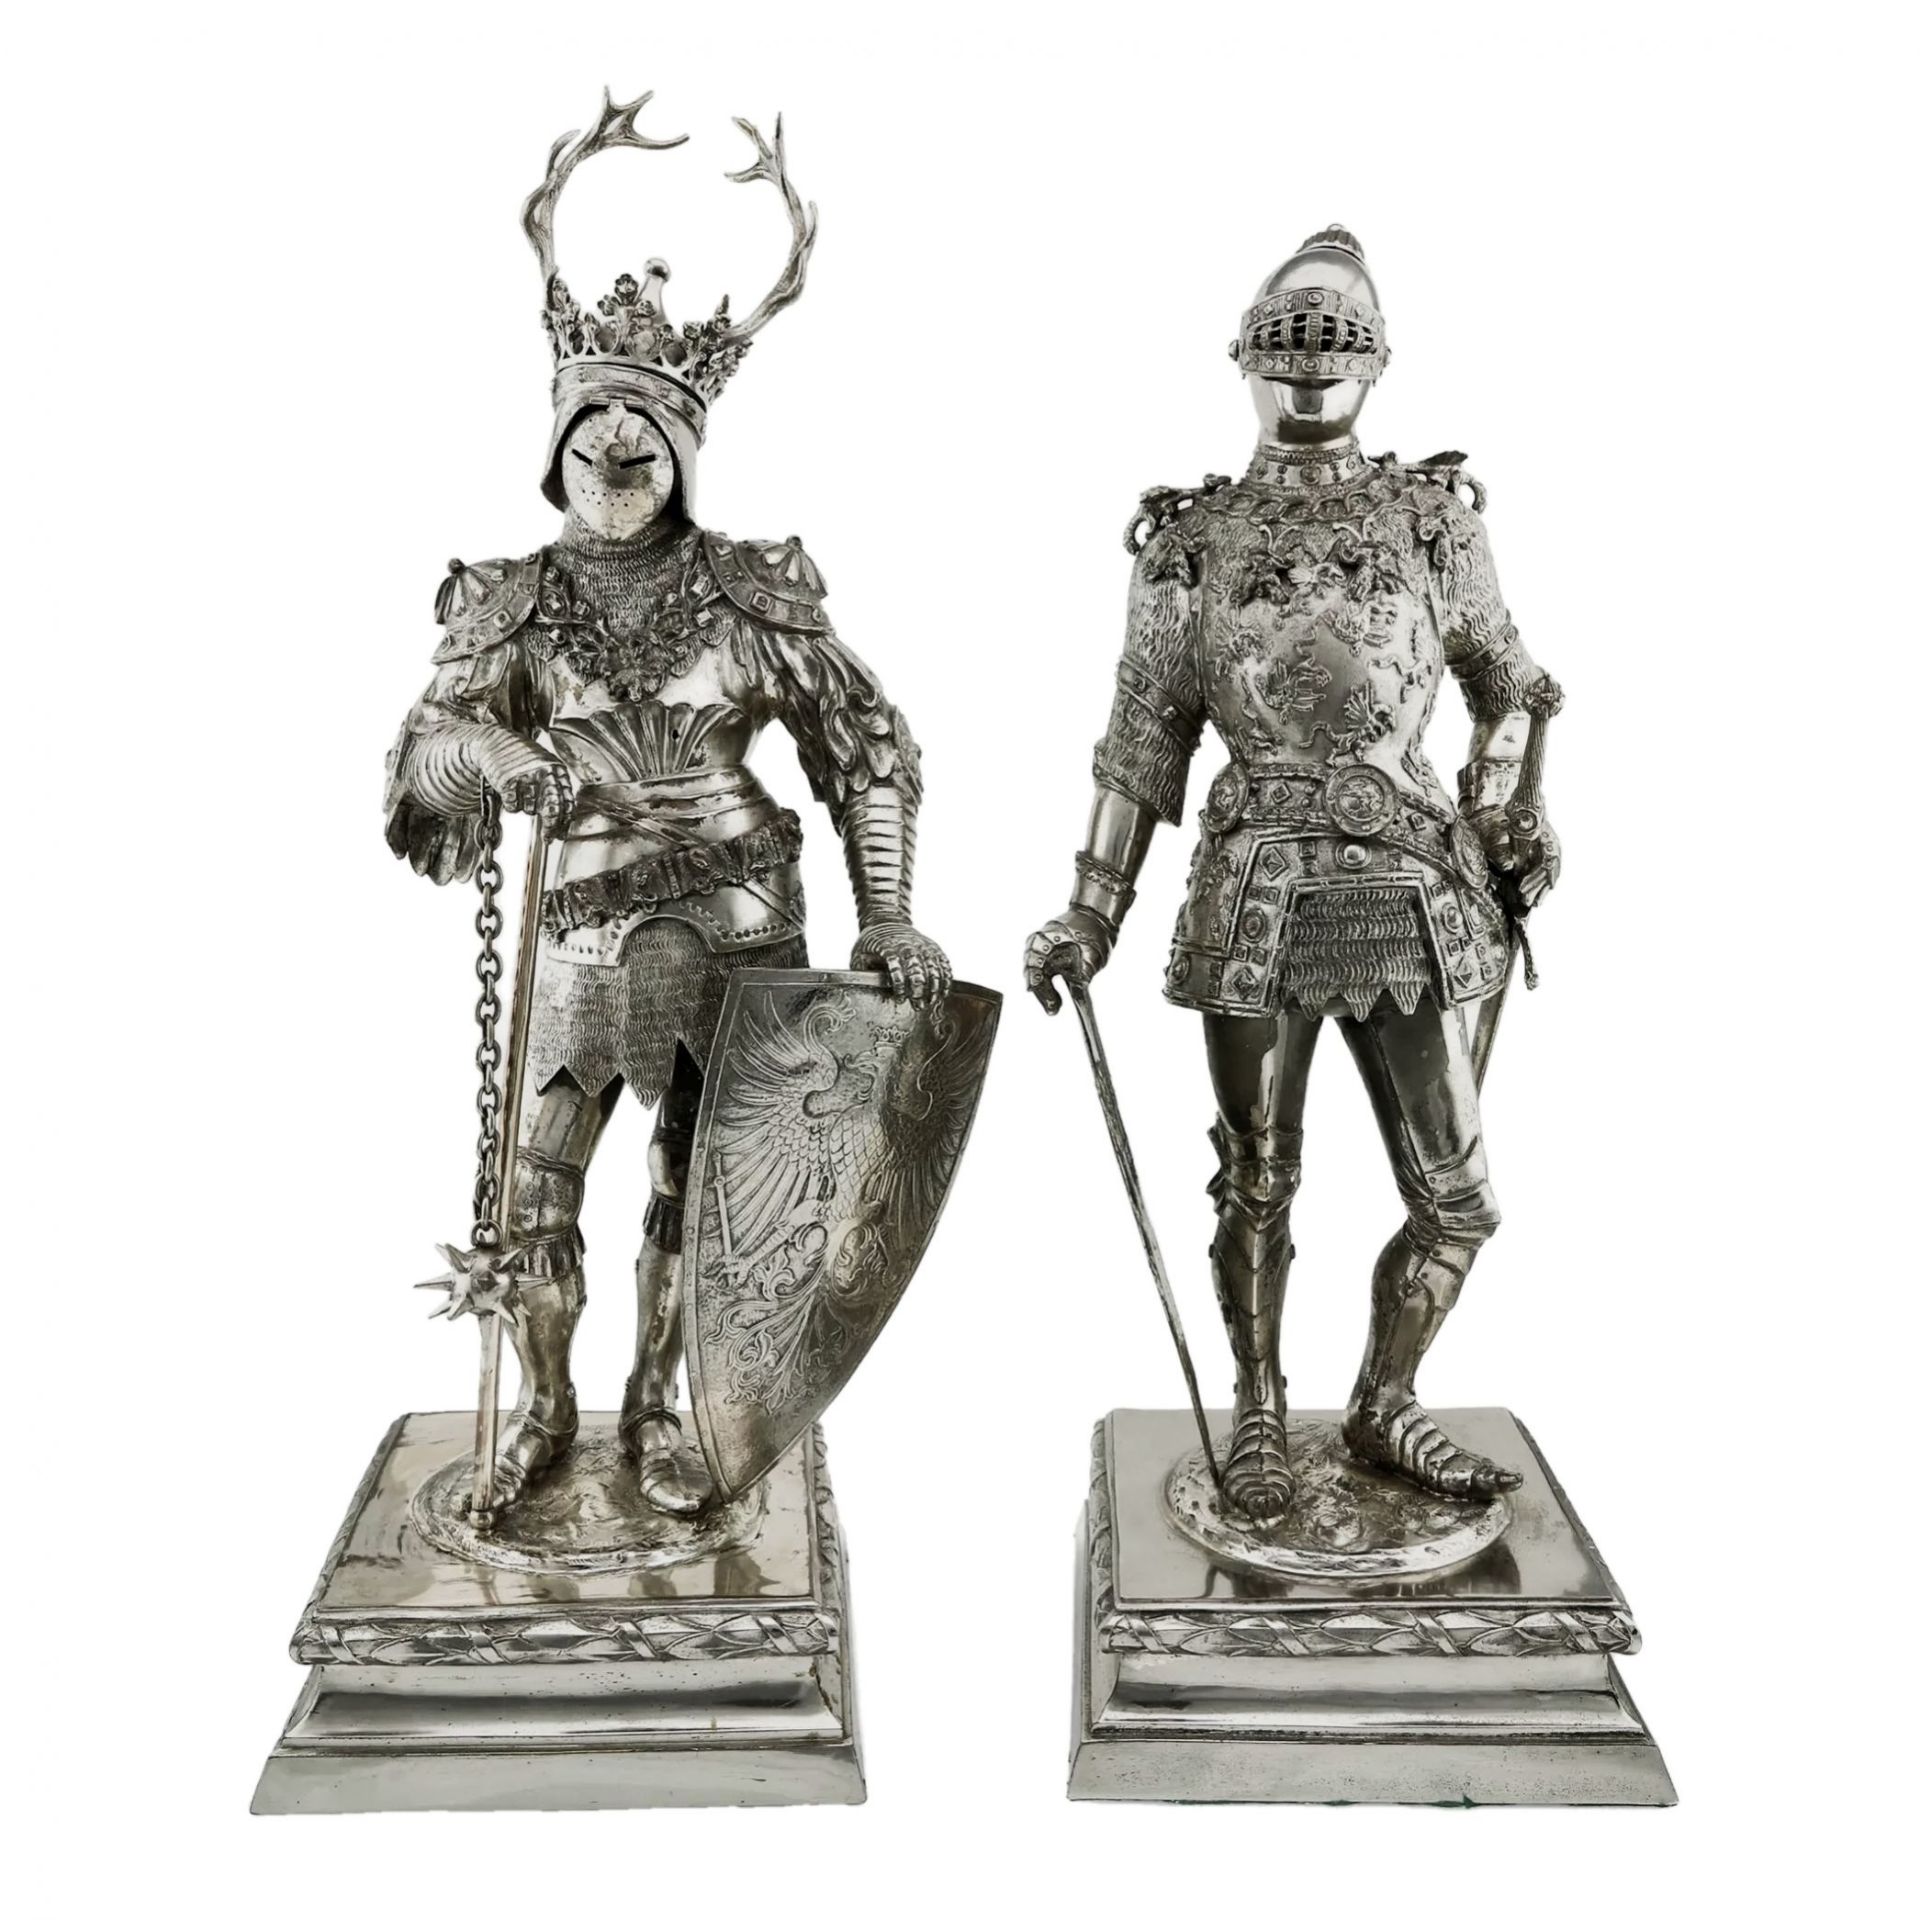 Pair of outstanding cabinet figures of knights in silver by the Hanau masters from the 19th century.